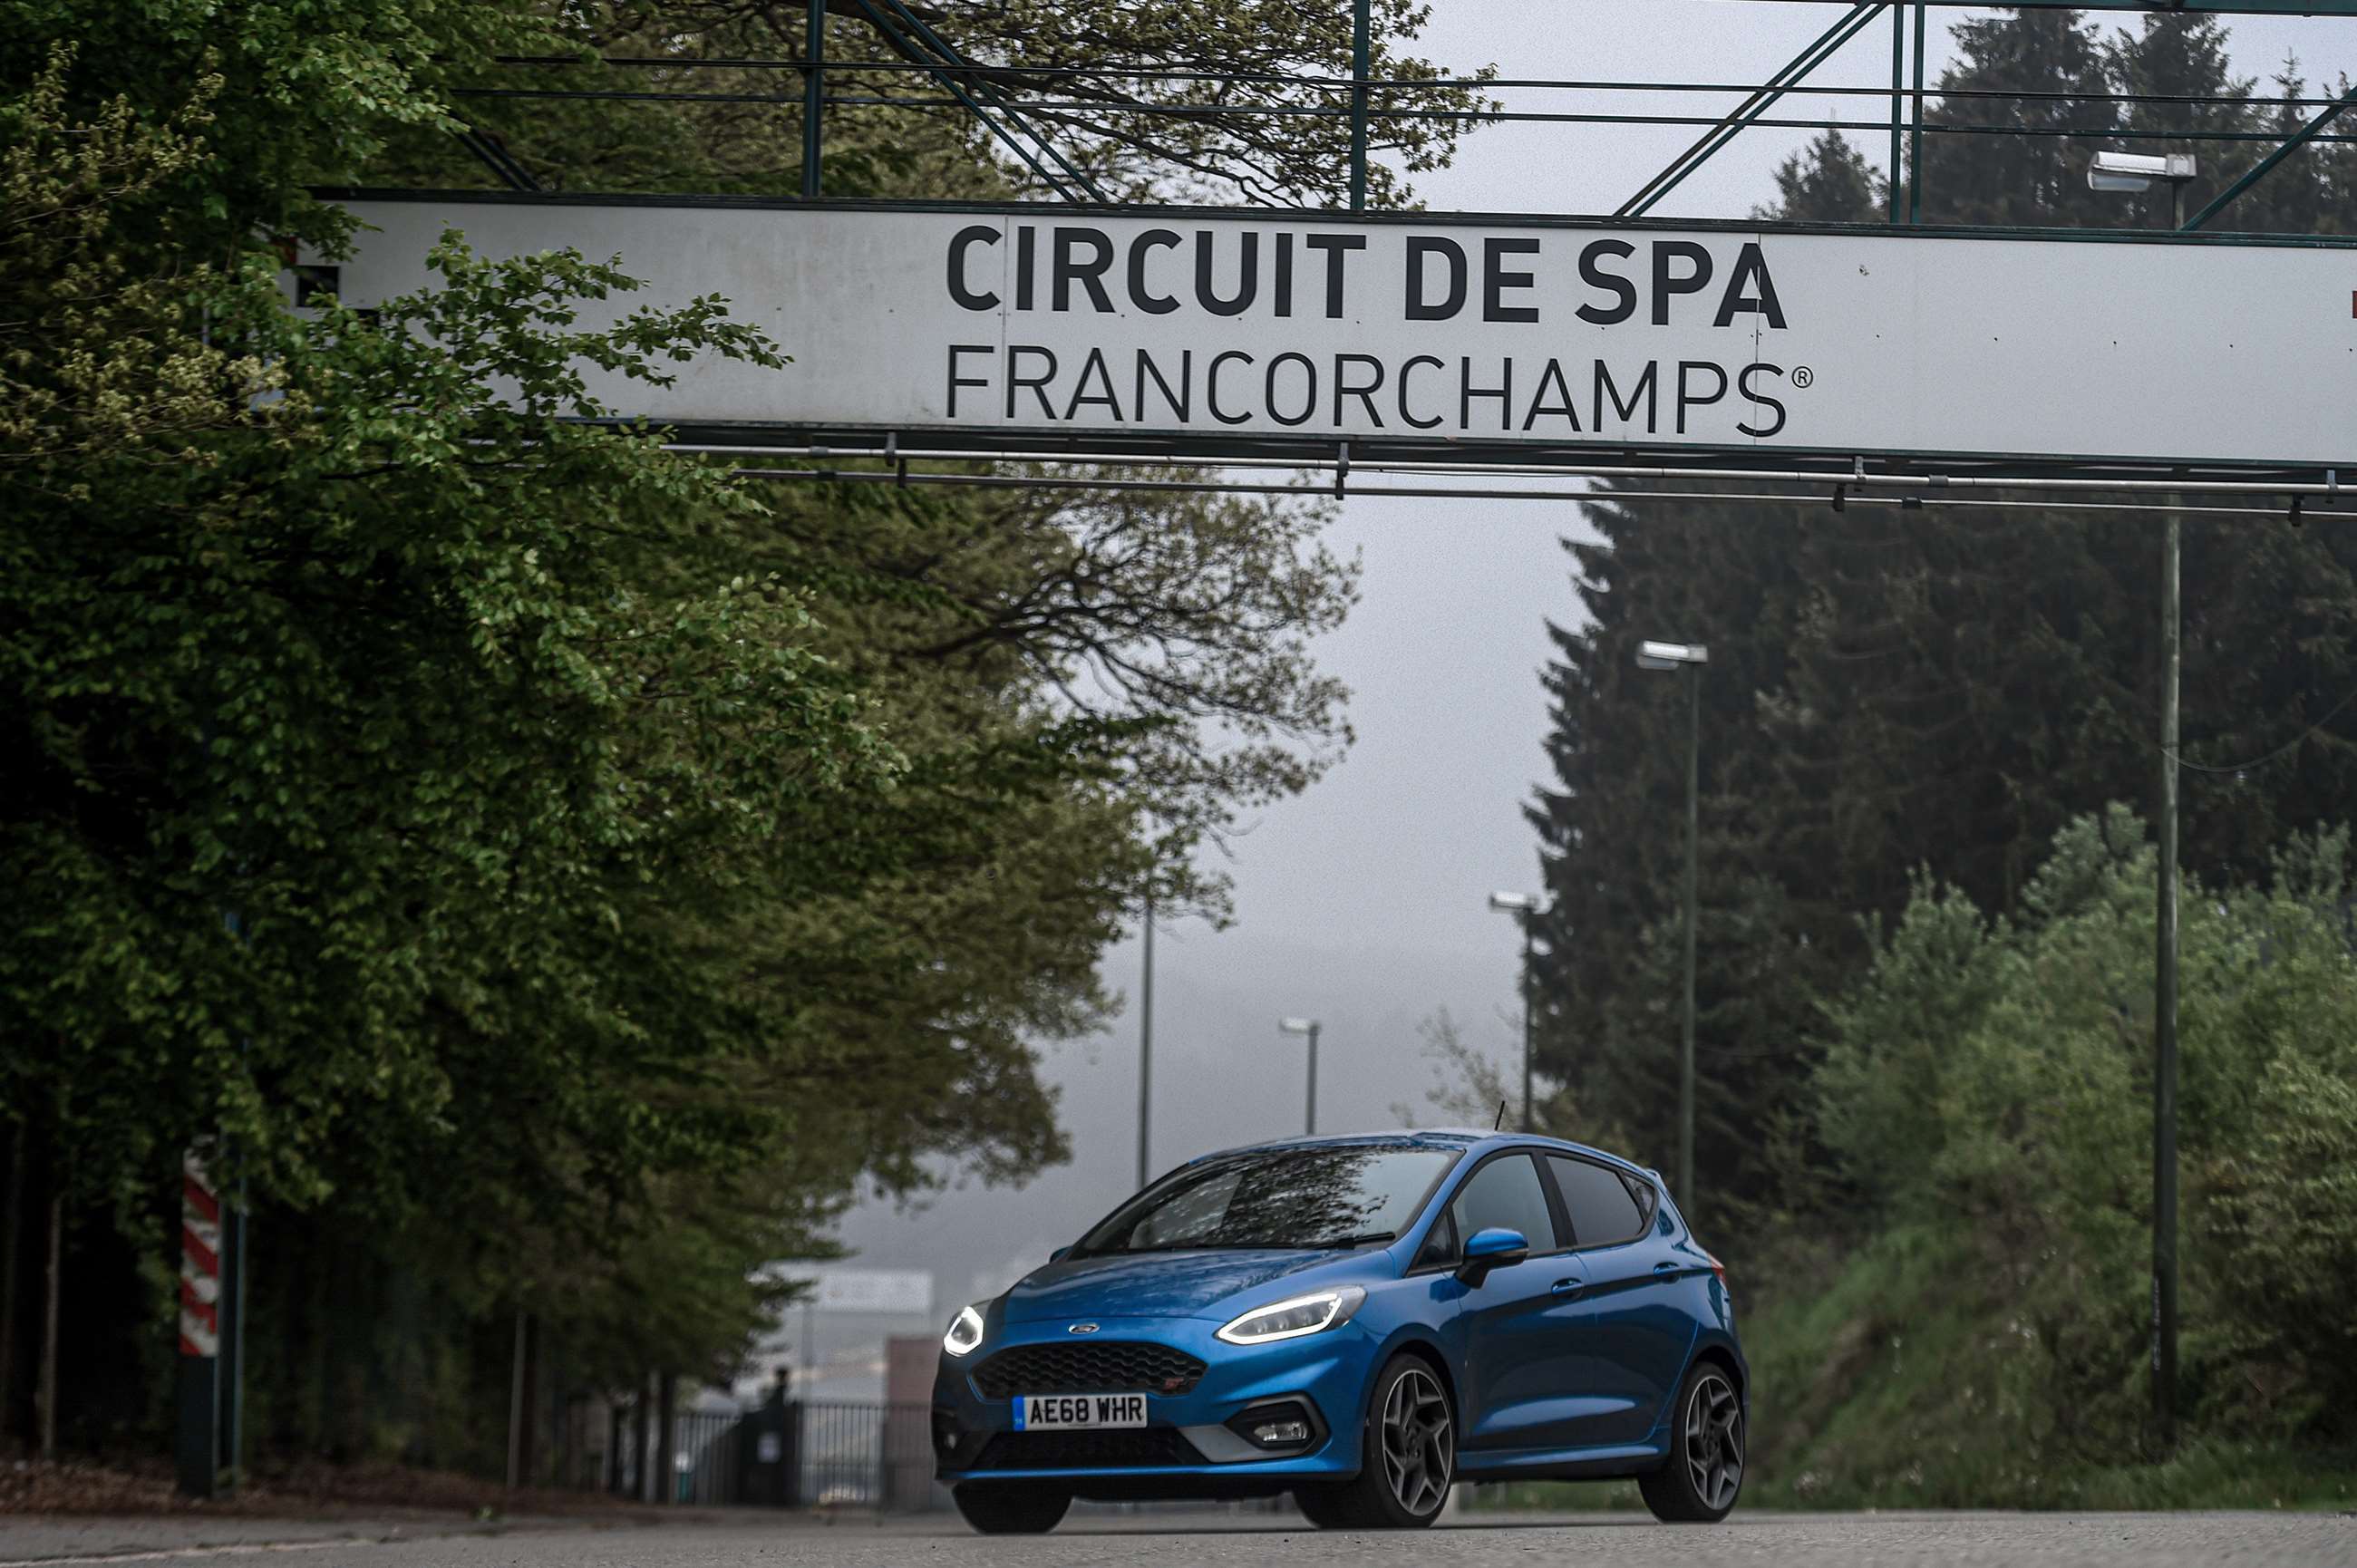 ford-fiesta-st-spa-francorchamps-pete-summers-goodwood-06062019.jpg